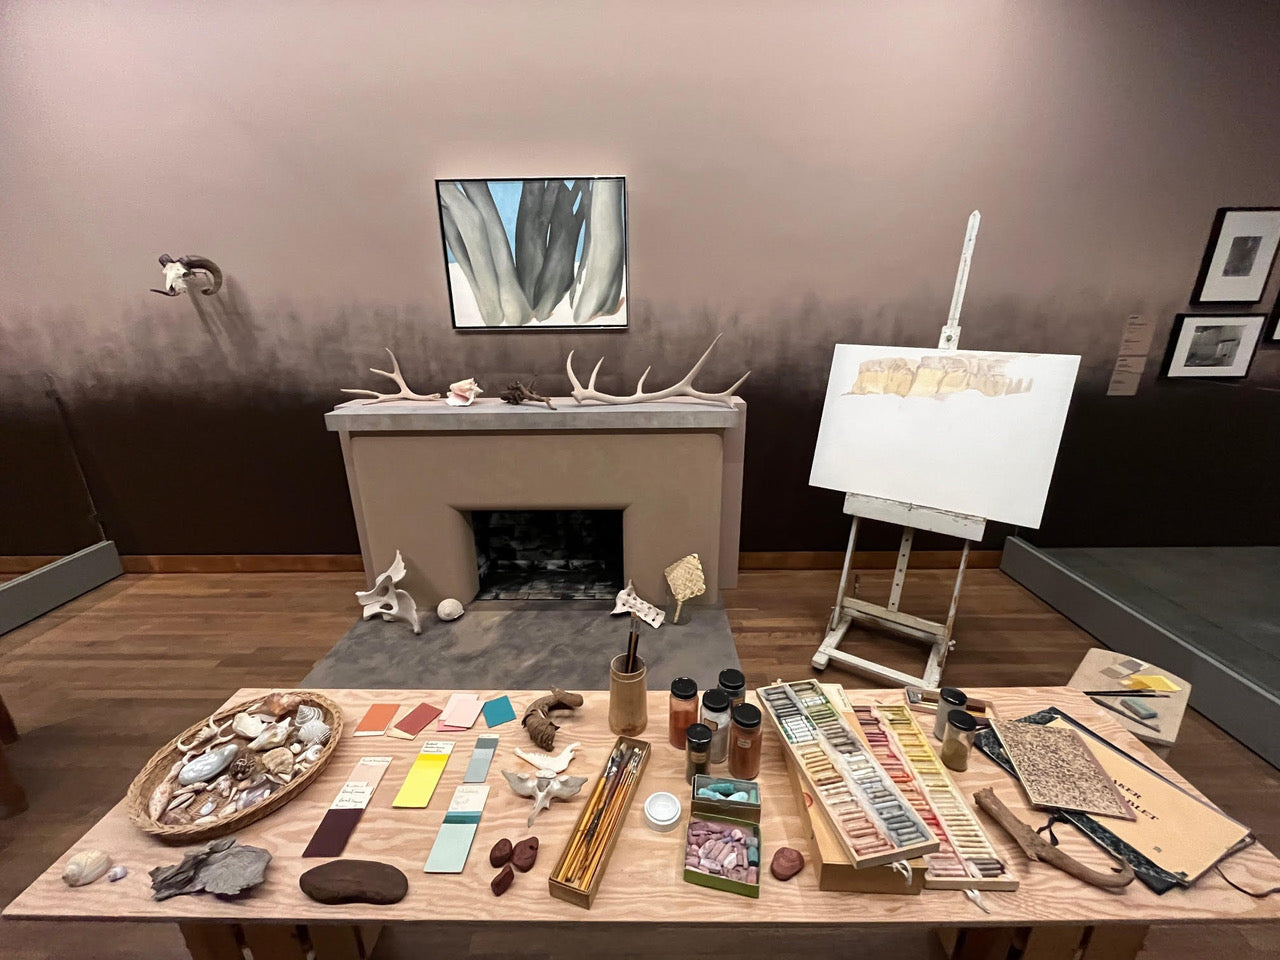 Installation view of Georgia O'Keeffe's recreated studio as part of 'O'Keeffe and Moore' exhibition at Montreal Museum of Fine Arts. Photo by Chadd Scott.